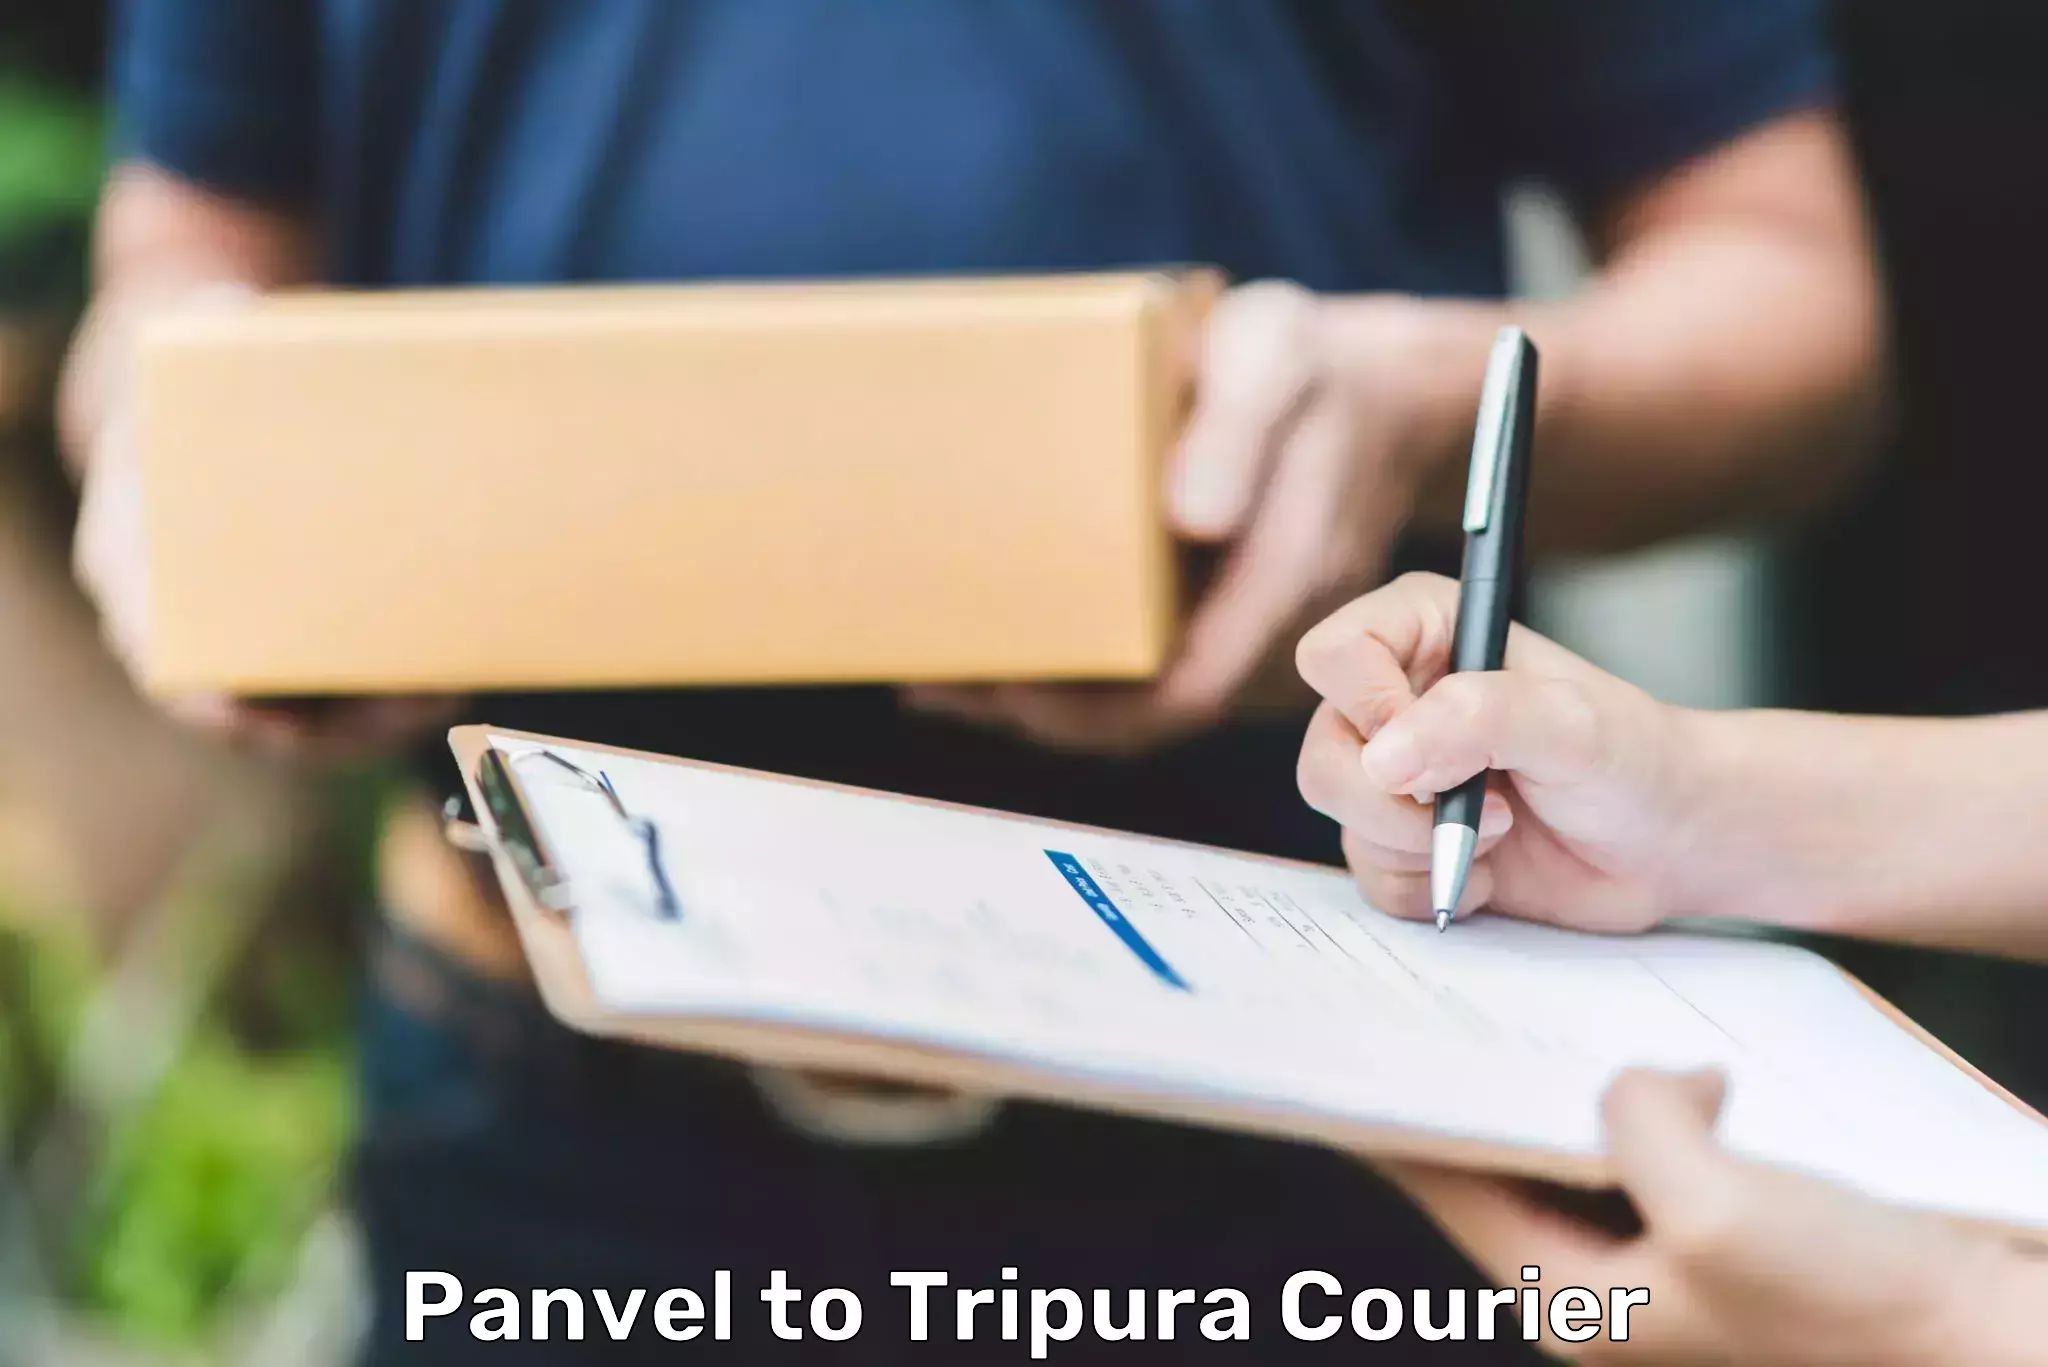 Residential courier service Panvel to Udaipur Tripura